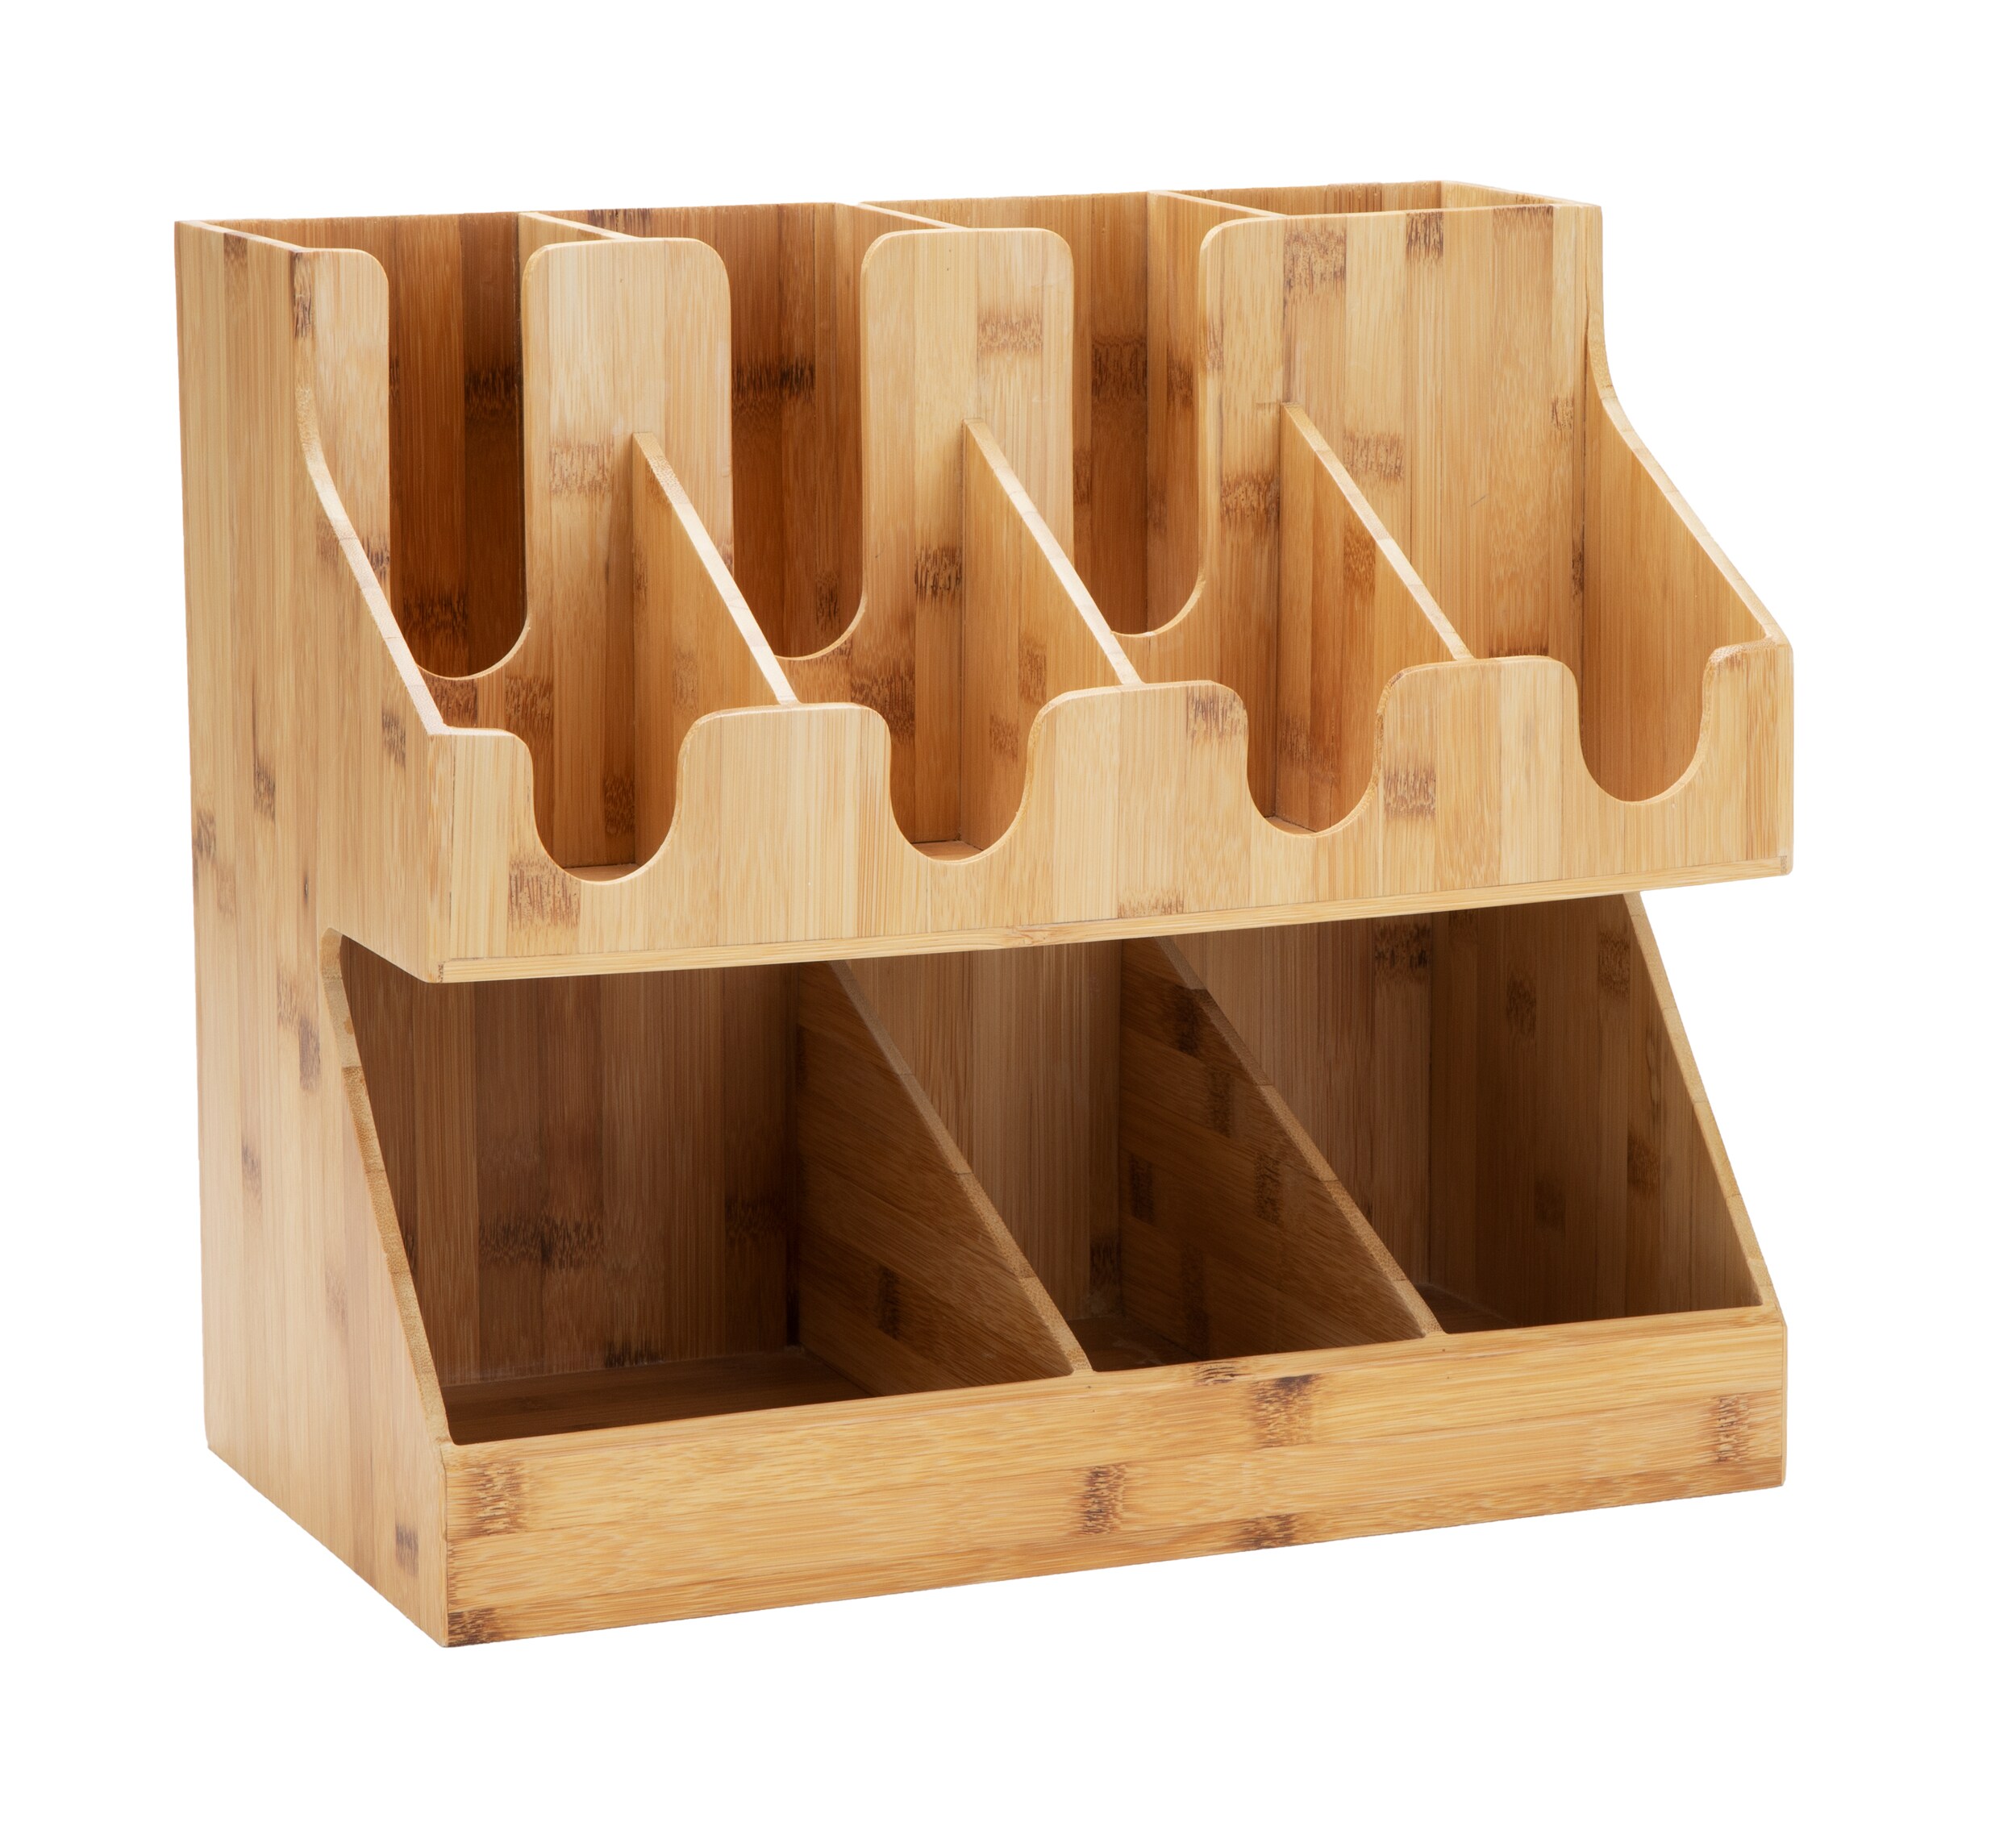 Professional 4 Orange Wood Condiment Tray with 6 holders Commercial quality 